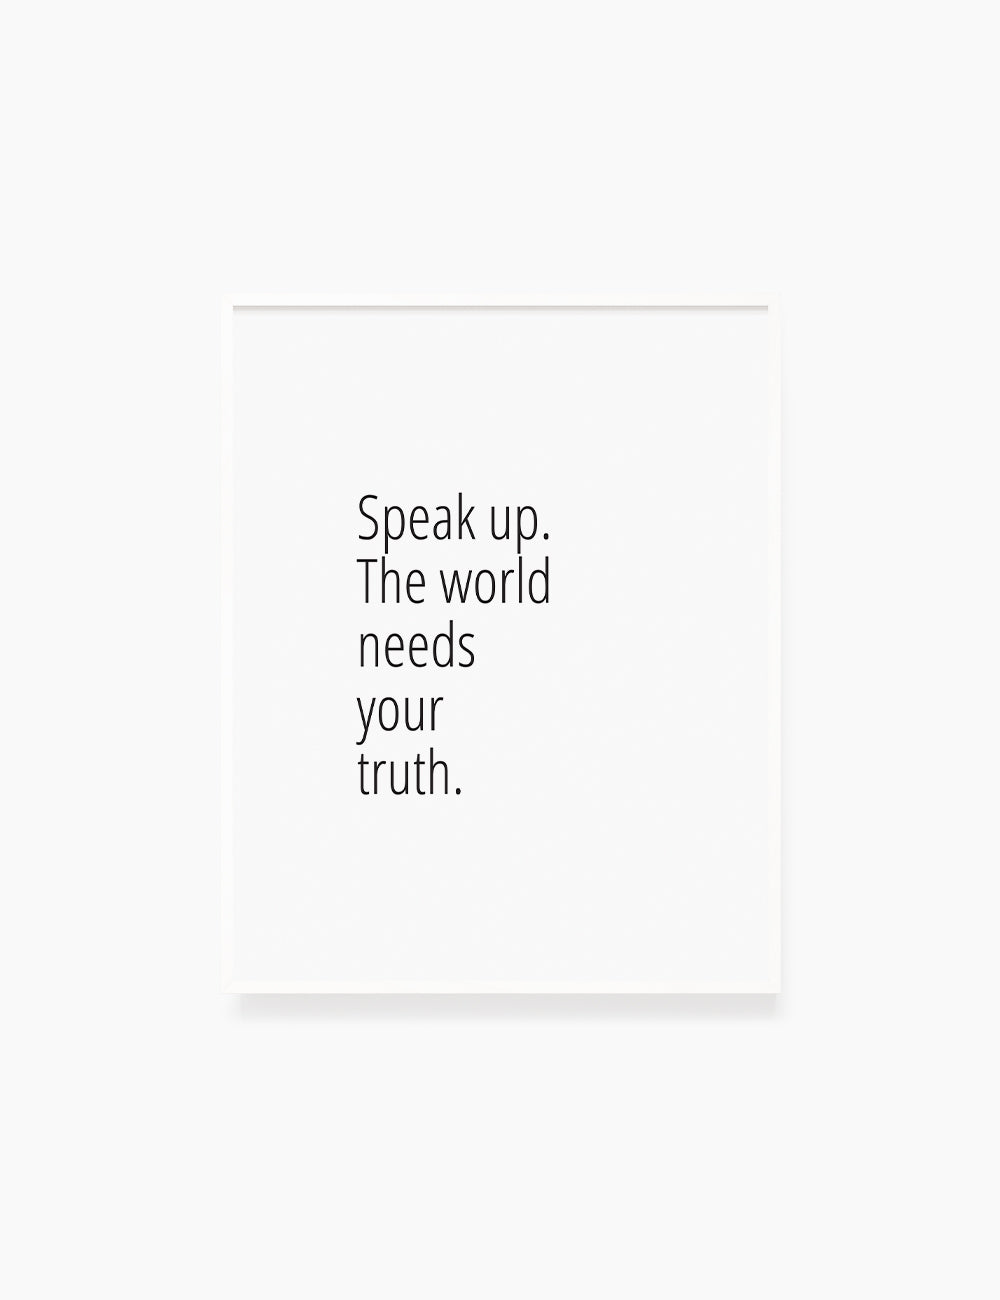 Printable Wall Art Quote: SPEAK UP. THE WORLD NEEDS YOUR TRUTH. Motivational Quote. WA037 - Paper Moon Art & Design